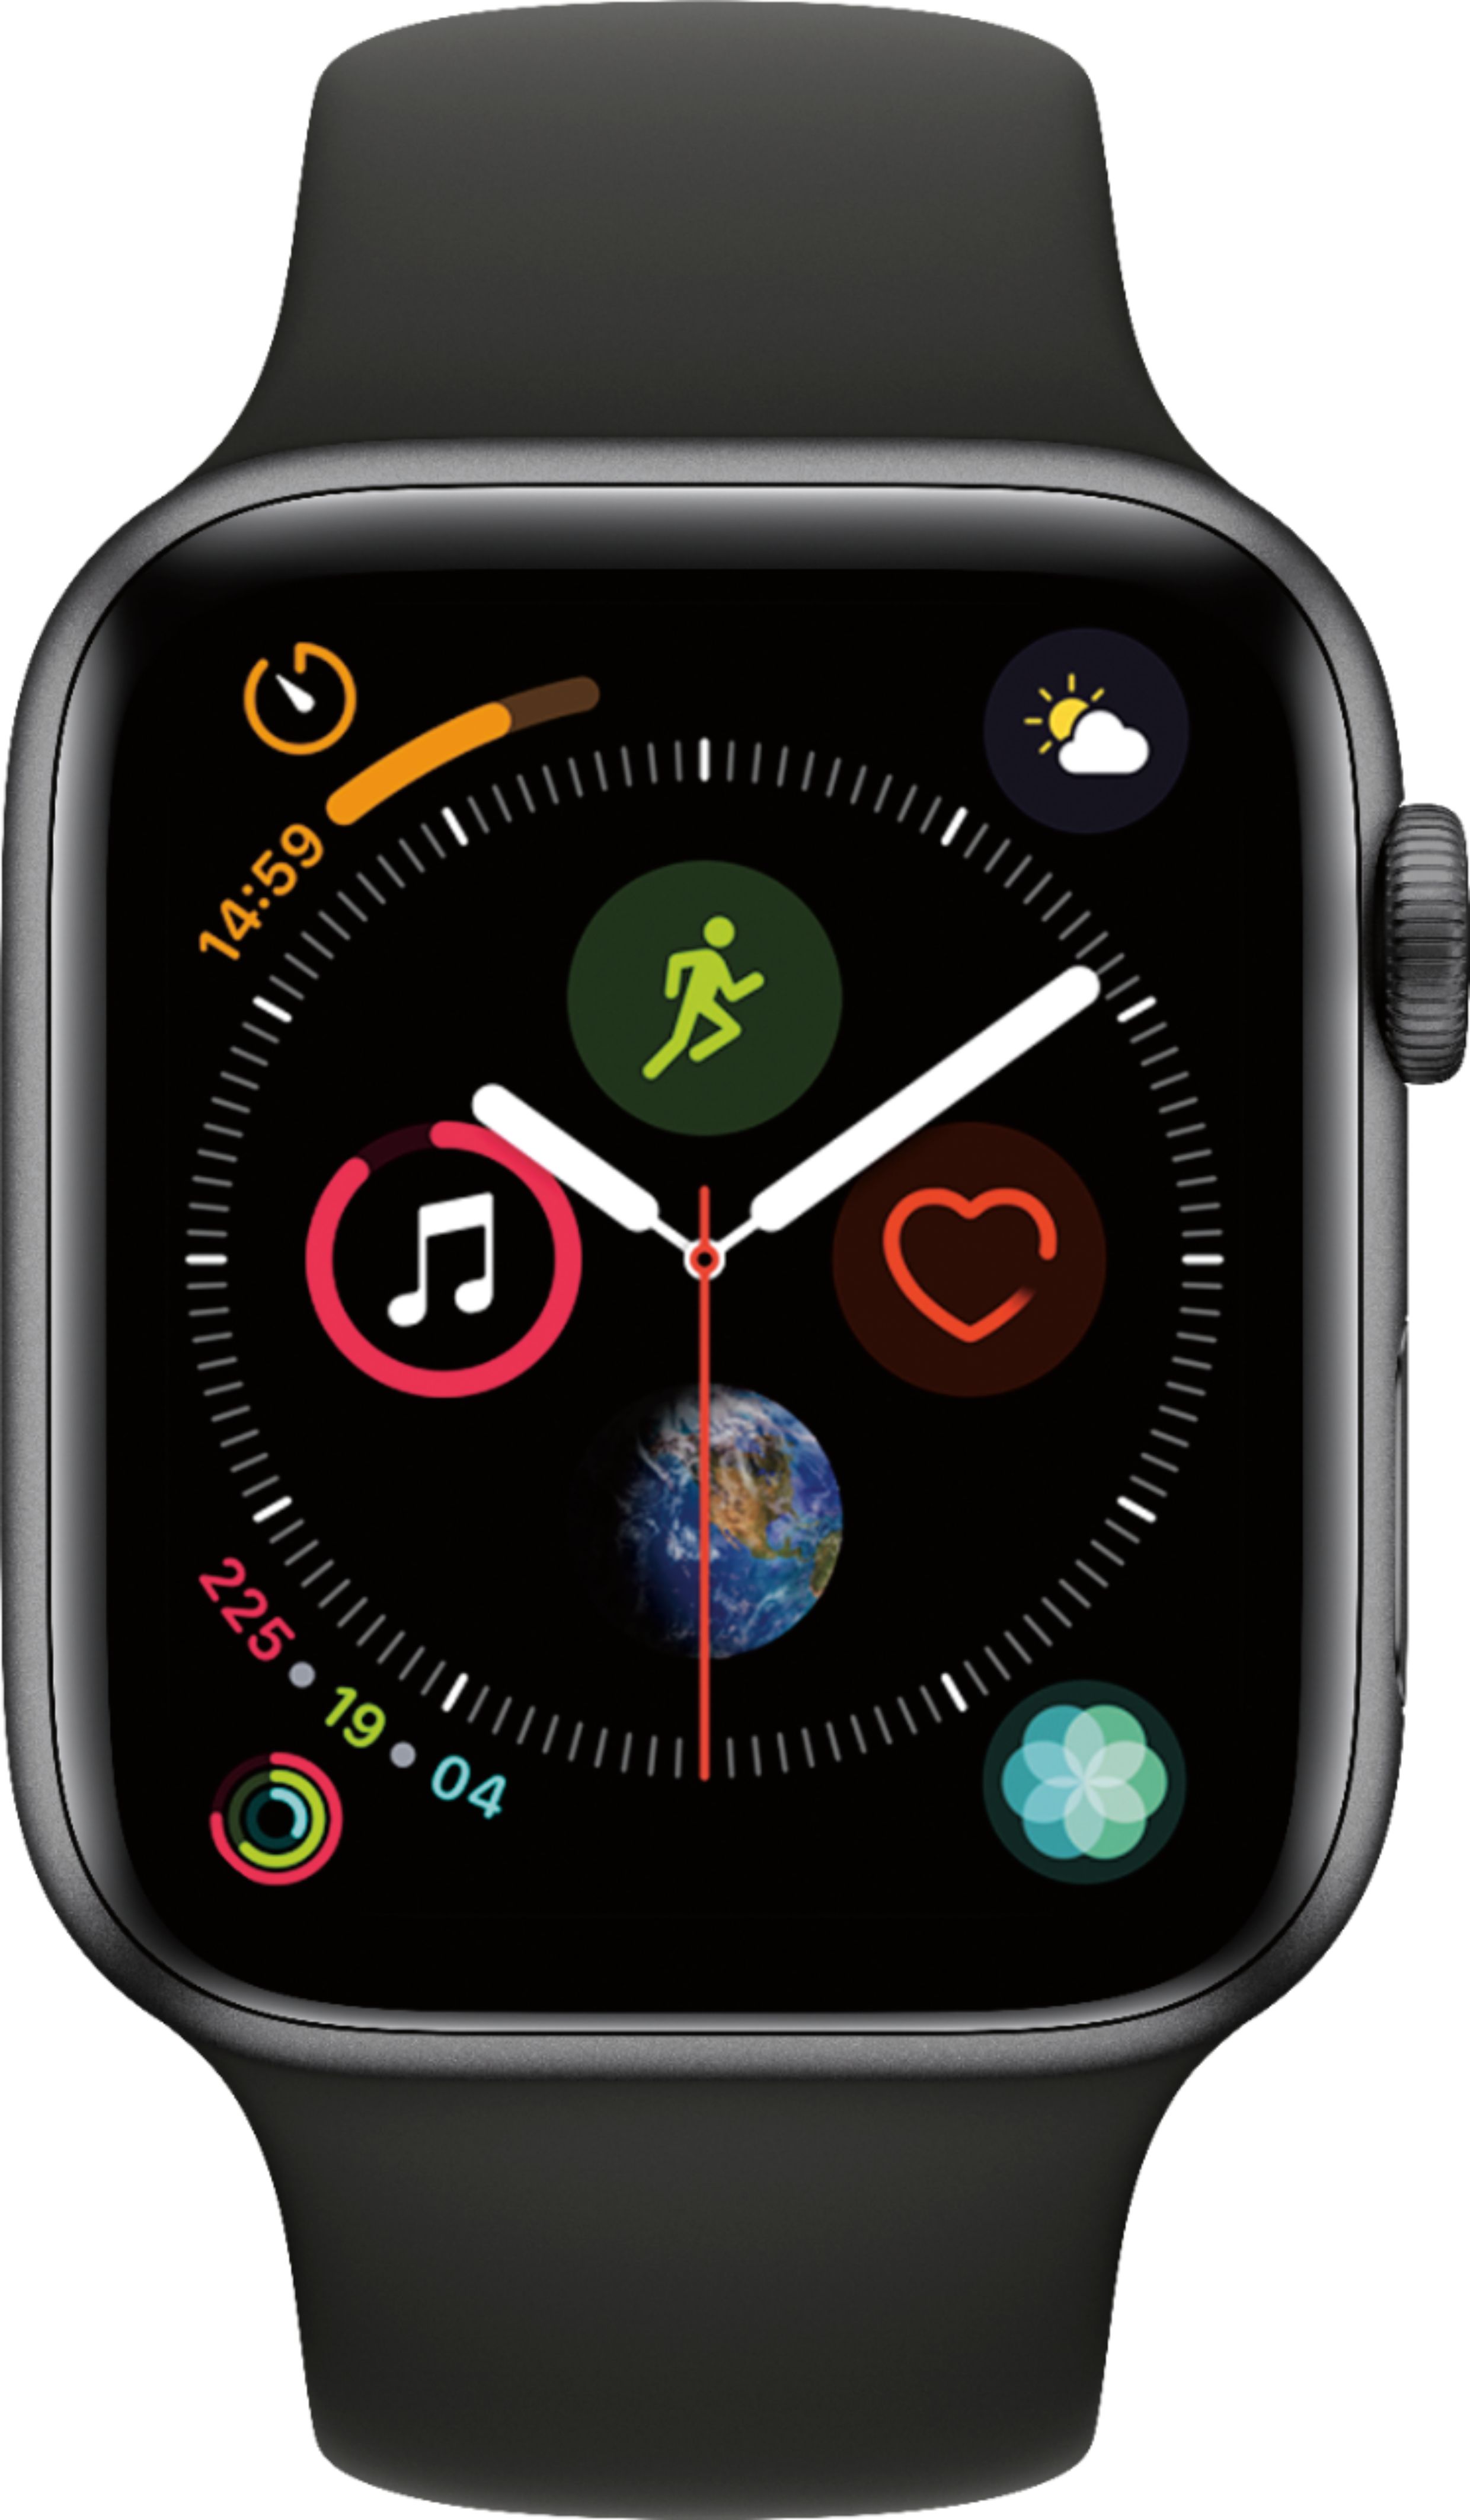 The Apple Watch Series 4 Hotsell, 59% OFF | www.emanagreen.com